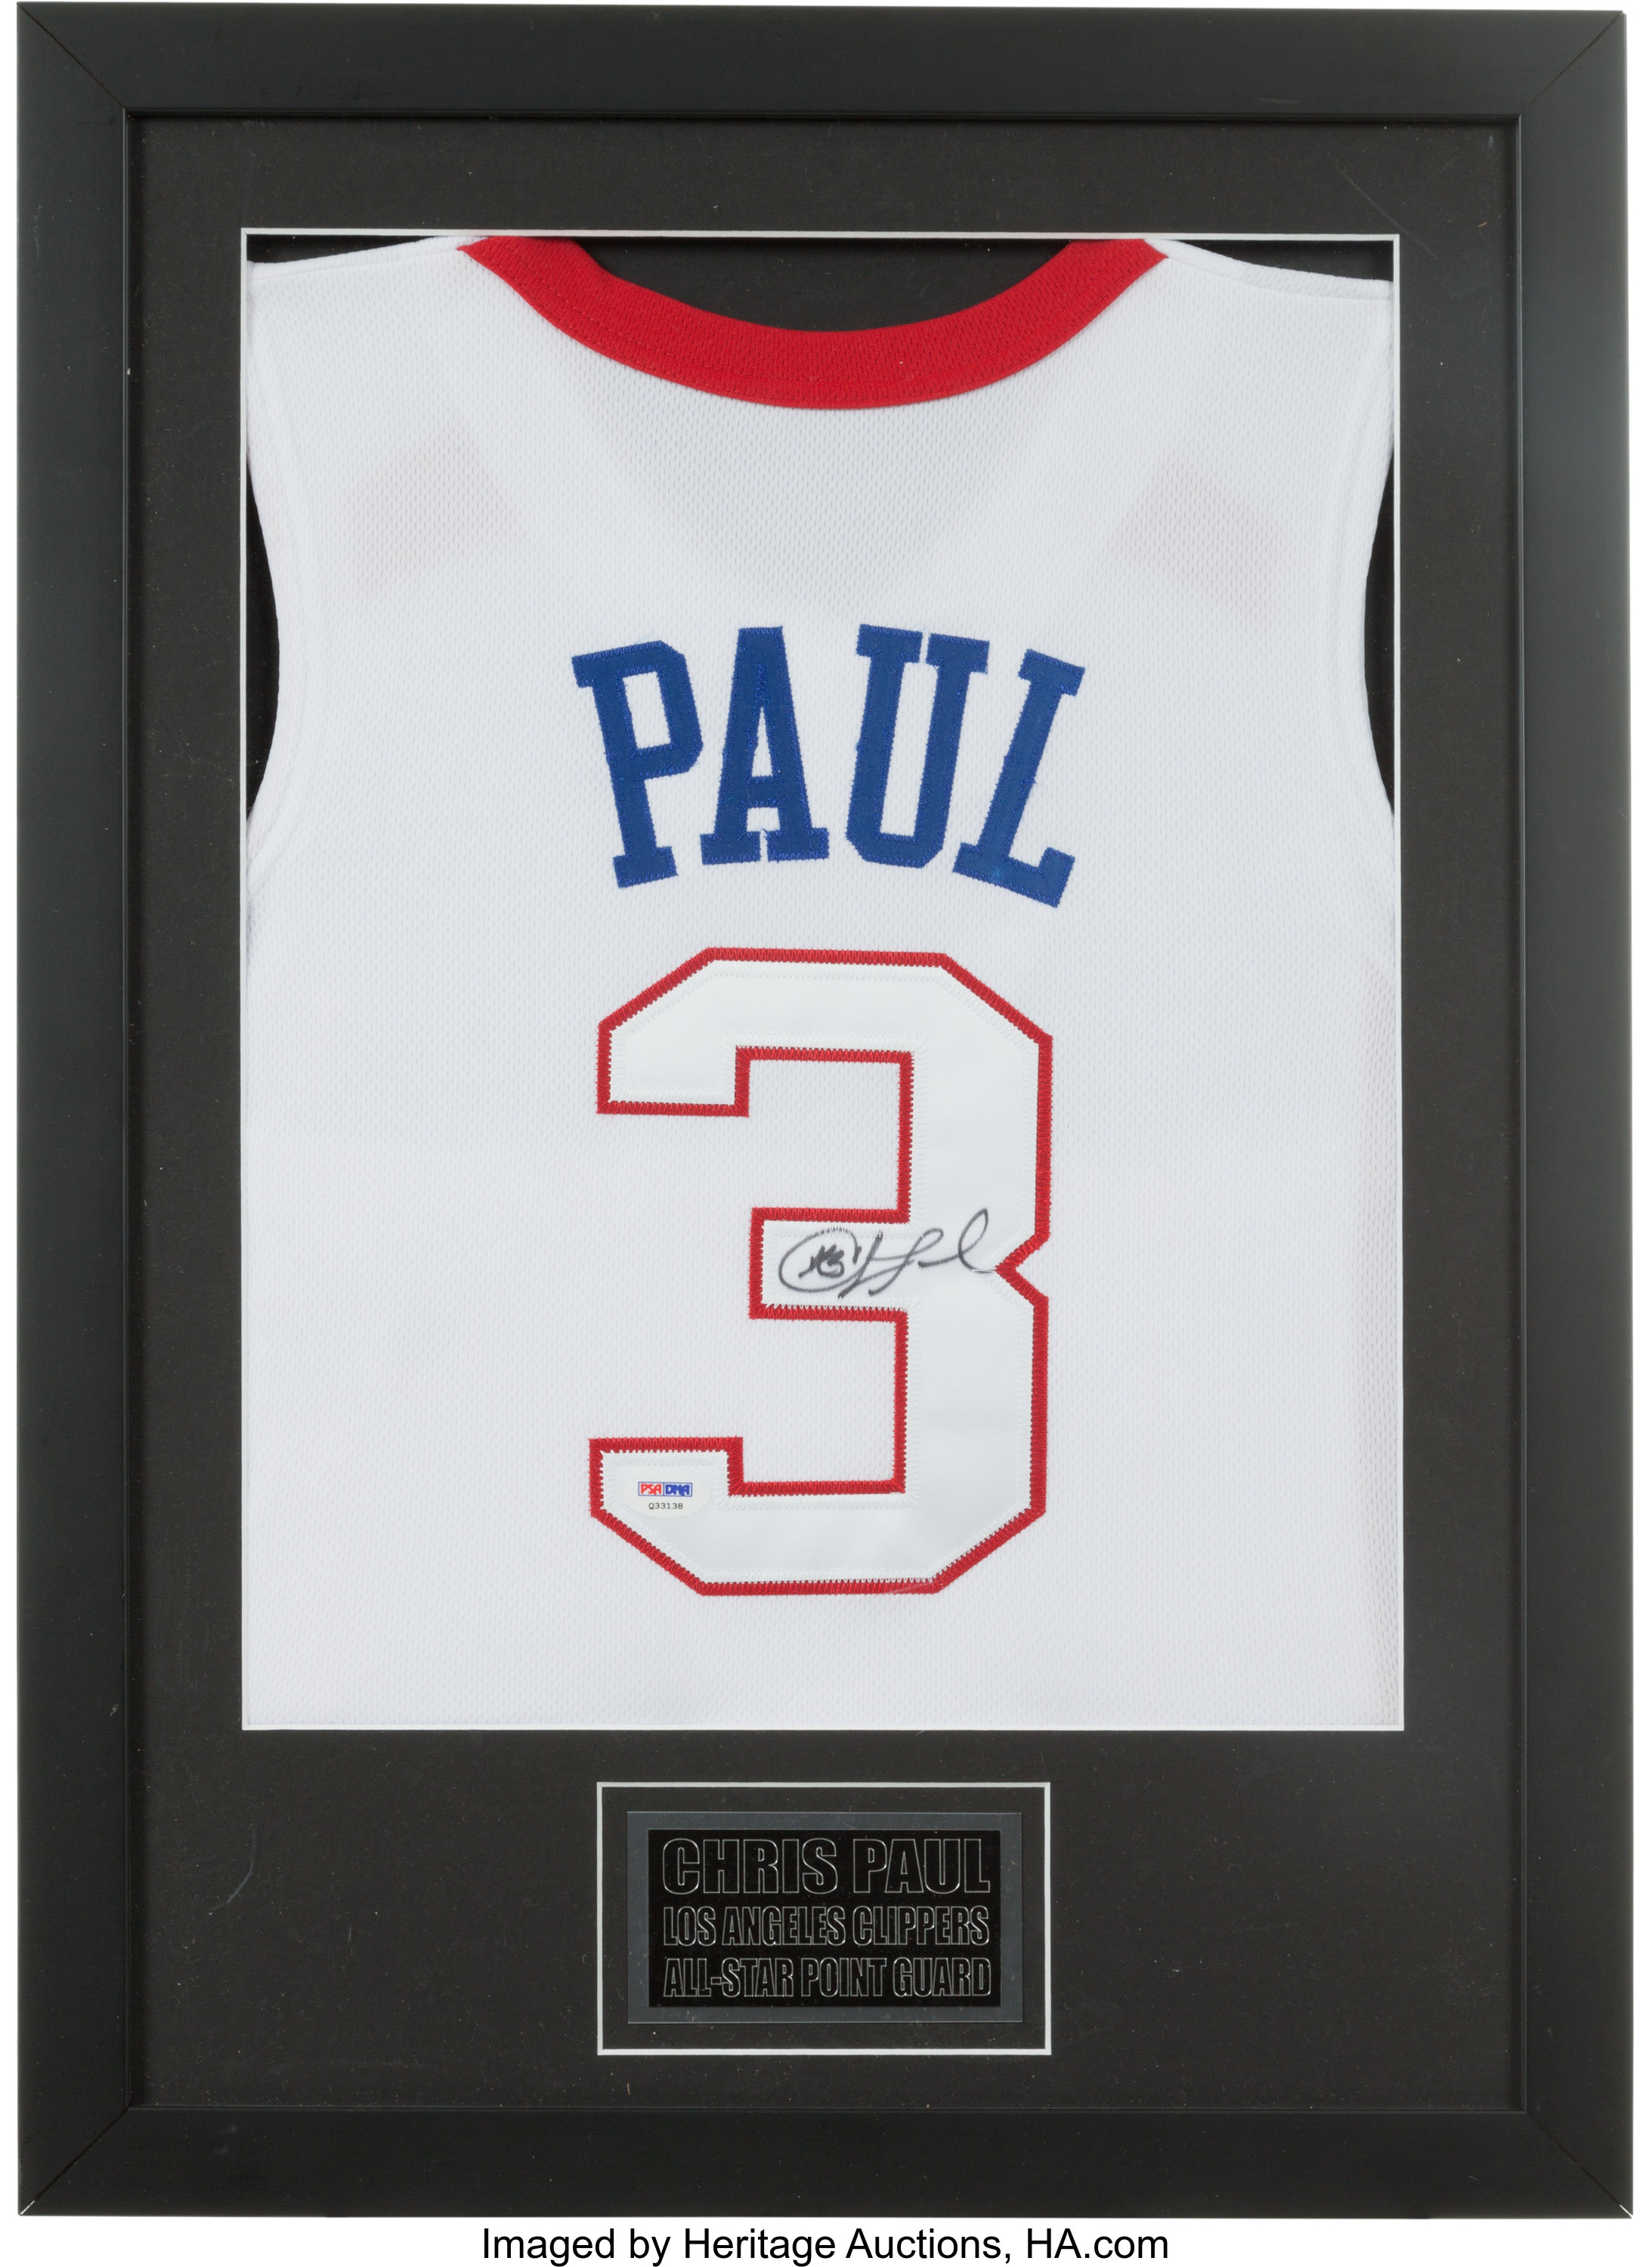 Chris Paul Signed Los Angeles Clippers Jersey Display. , Lot #41157